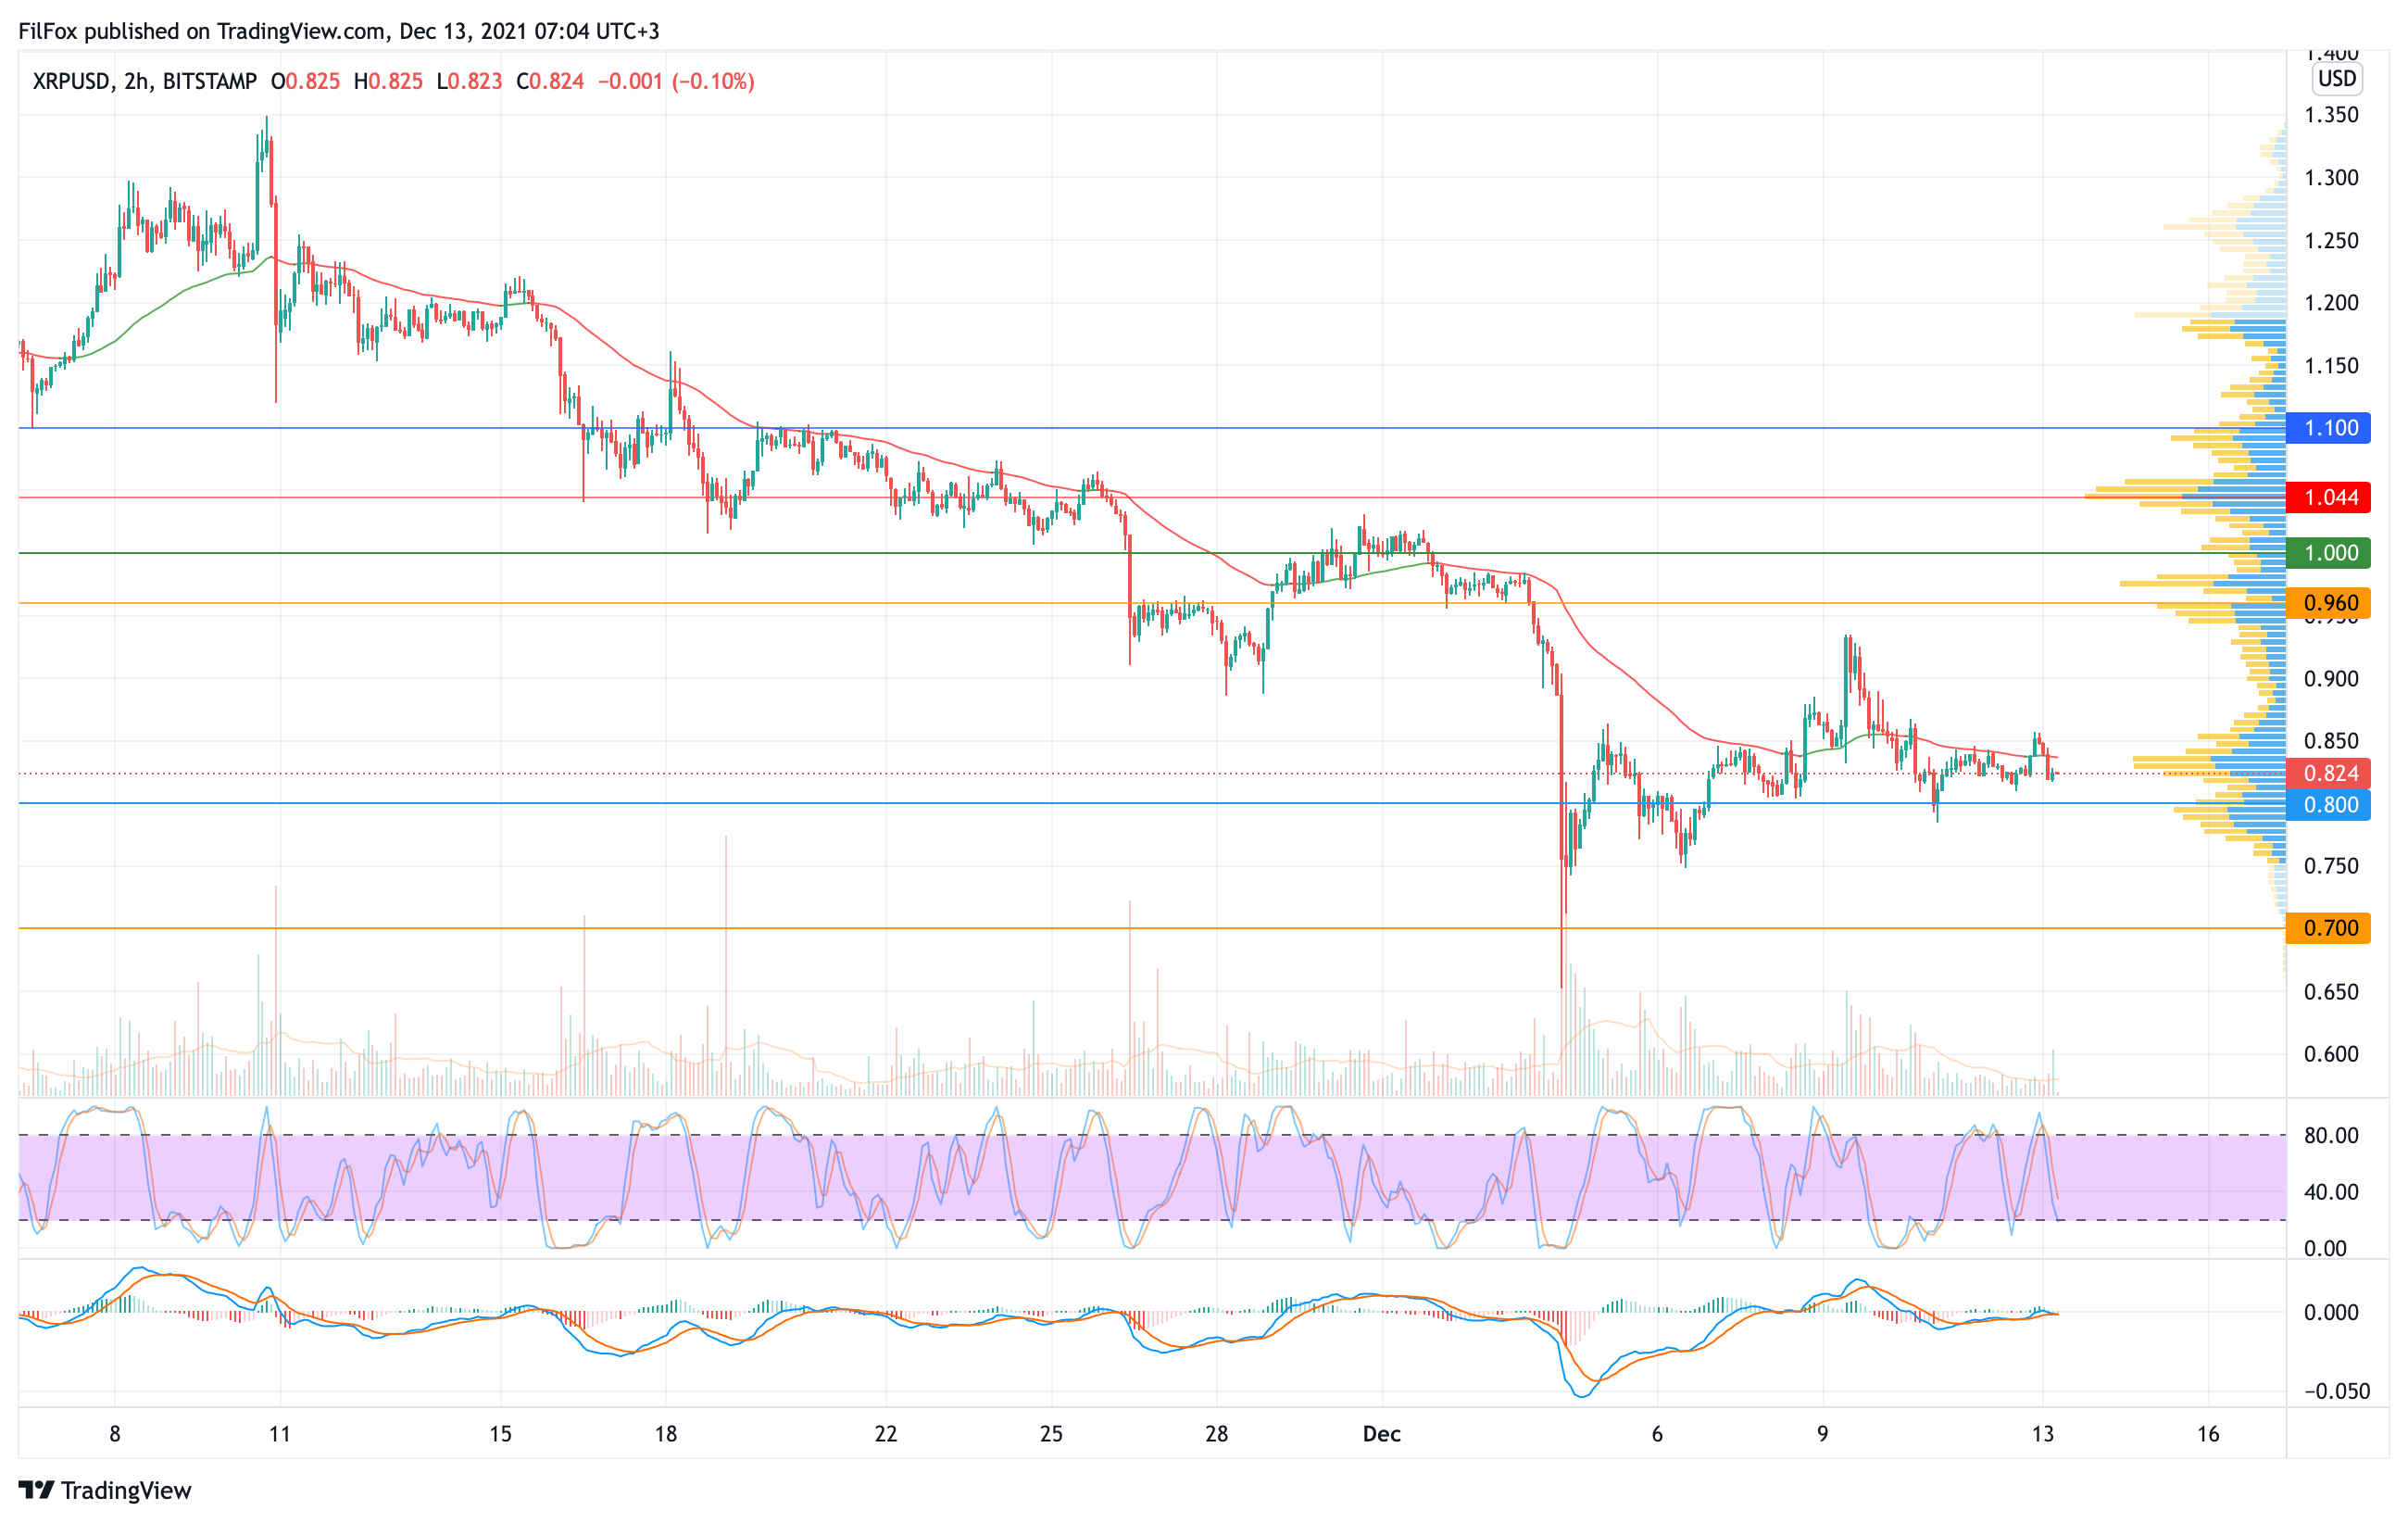 Analysis of the prices of Bitcoin, Ethereum, XRP for 12/13/2021